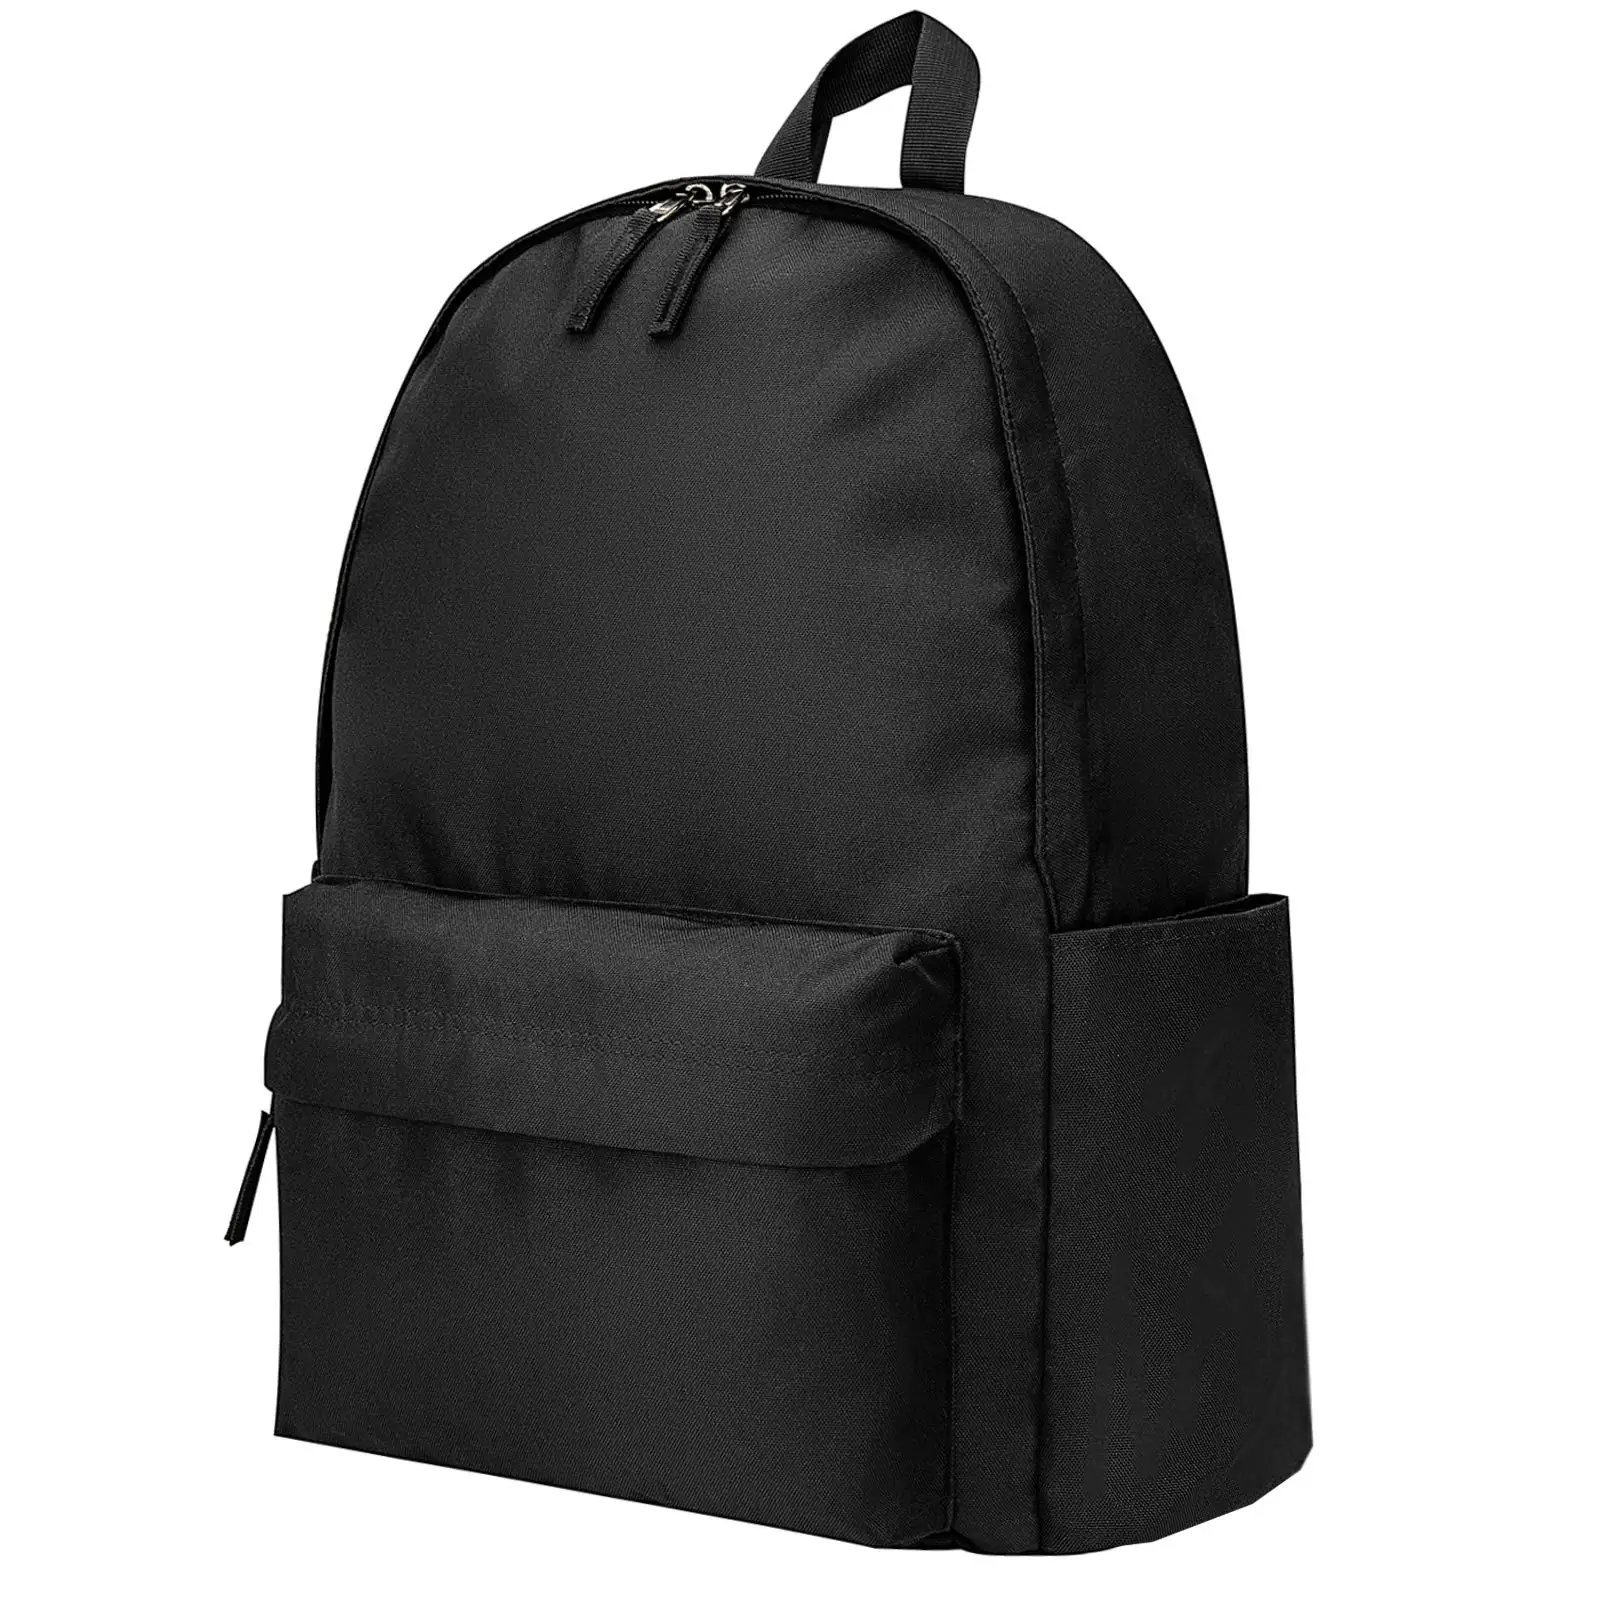 

Backpack Lightweight Backpack for College Travel Work for Men and Women